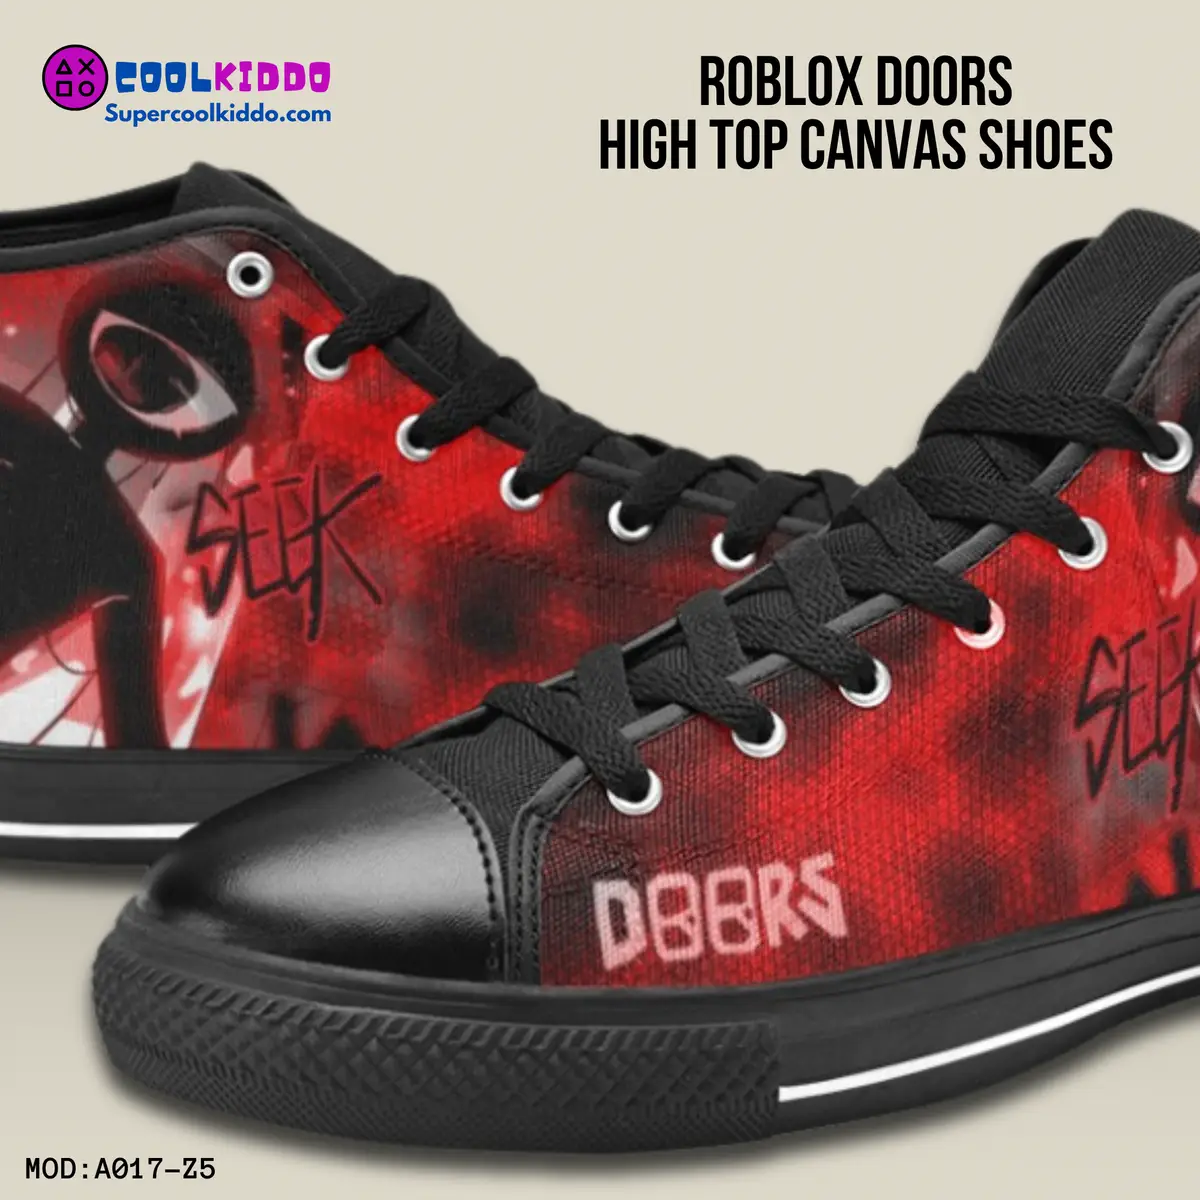 Roblox Doors Inspired High Top Shoes for Kids/Youth – “Seek” Character Print. High-Top Sneakers Cool Kiddo 10